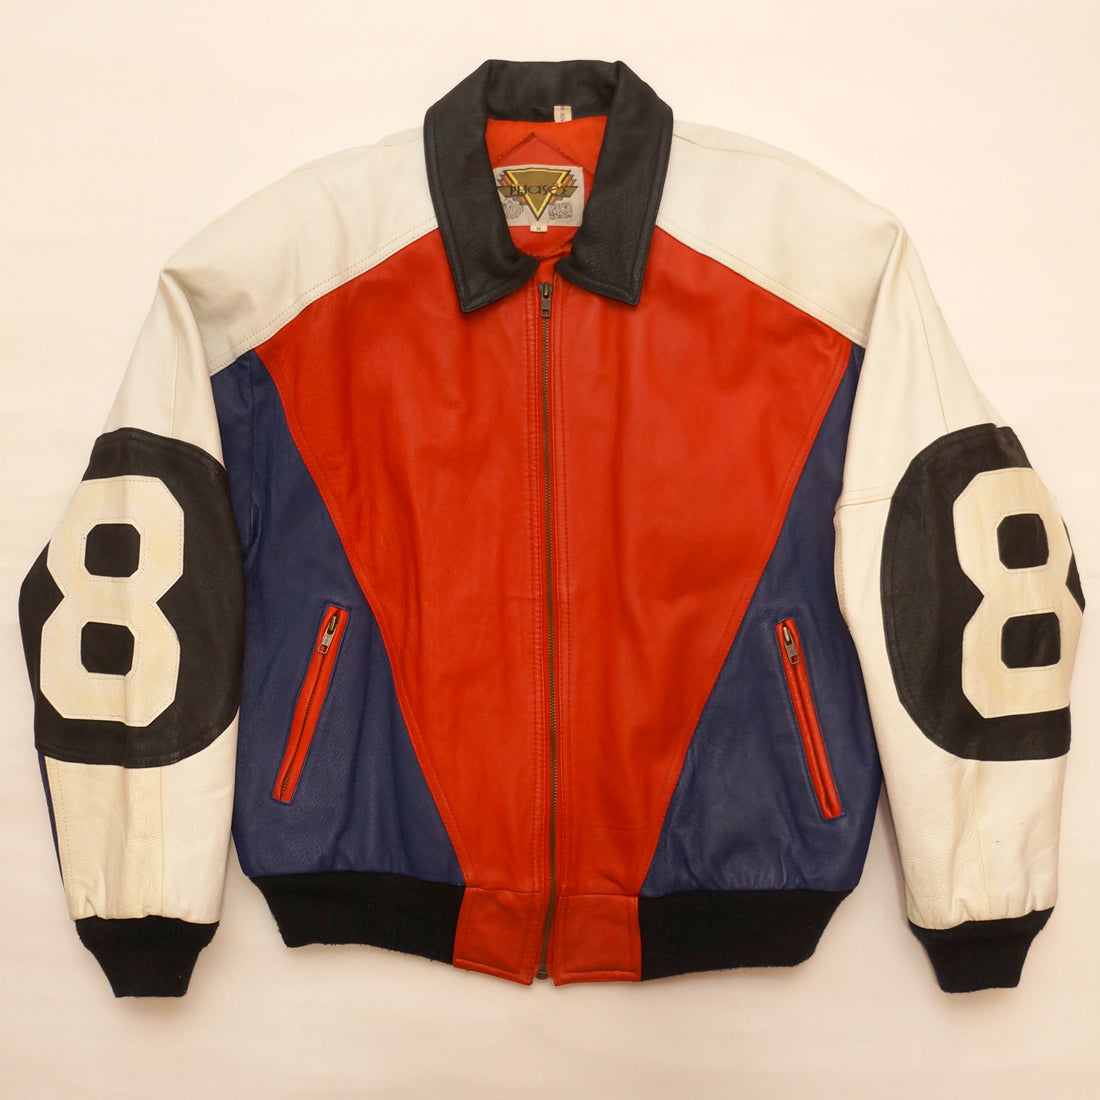 Vintage Red, White and Blue  Leather "8 Ball" Jacket By Phase 2